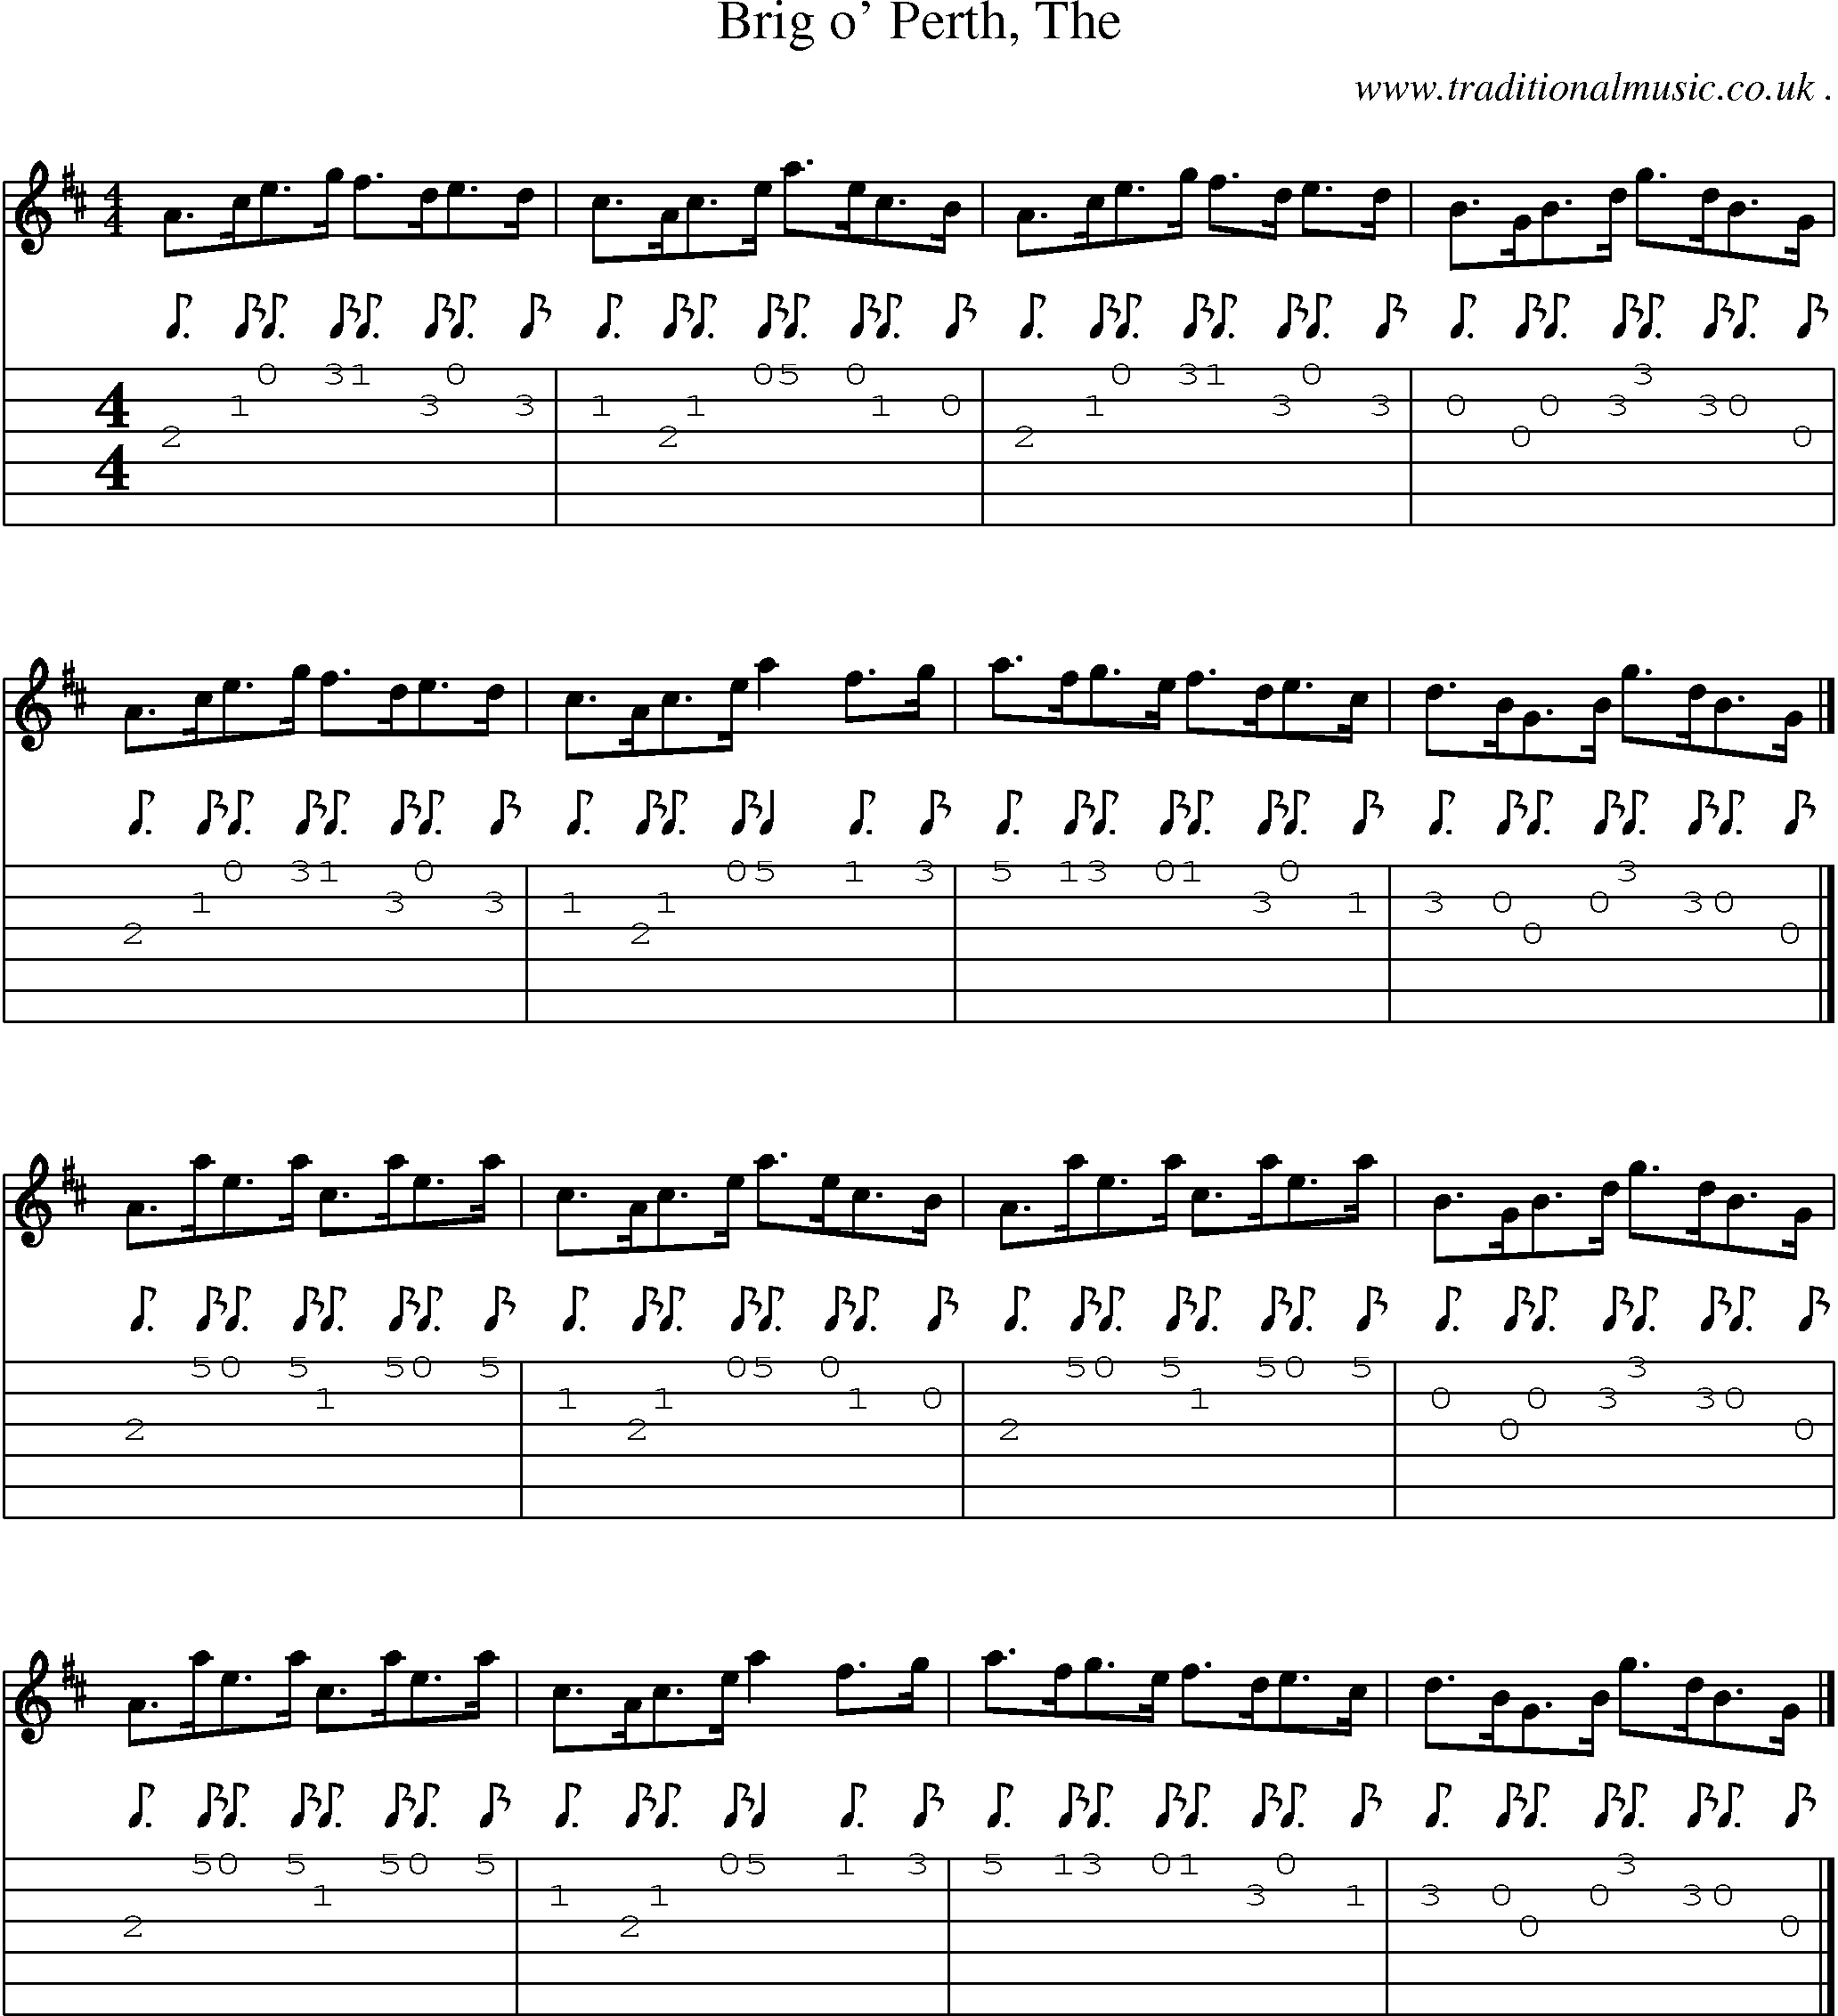 Sheet-music  score, Chords and Guitar Tabs for Brig O Perth The